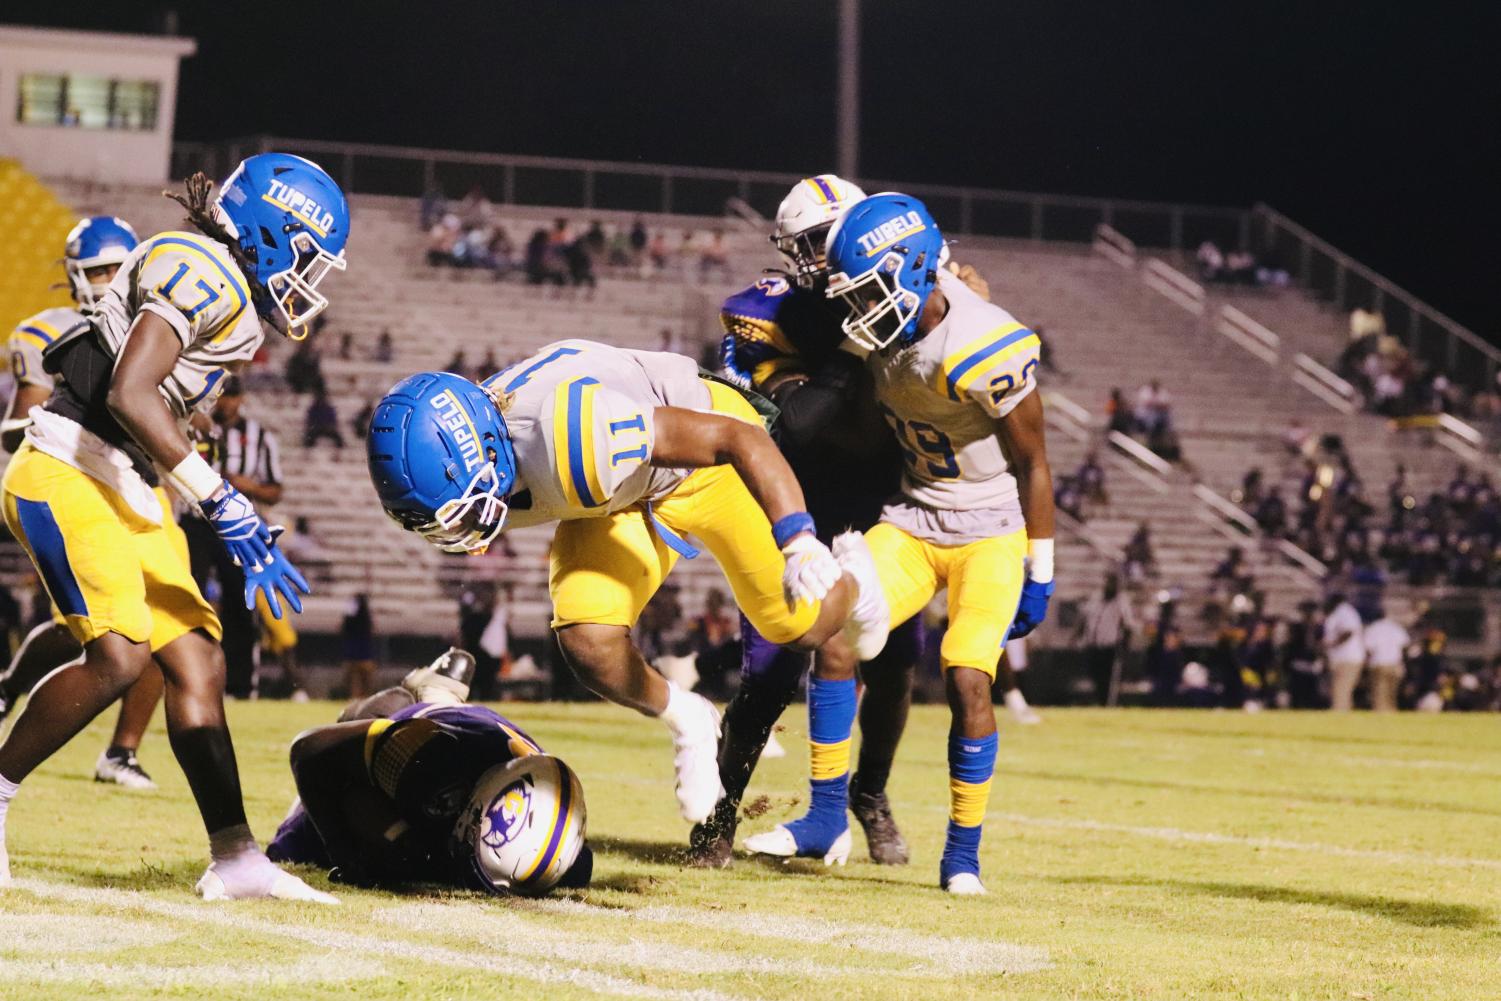 Tupelo+Football+Remains+Undefeated+Against+Columbus